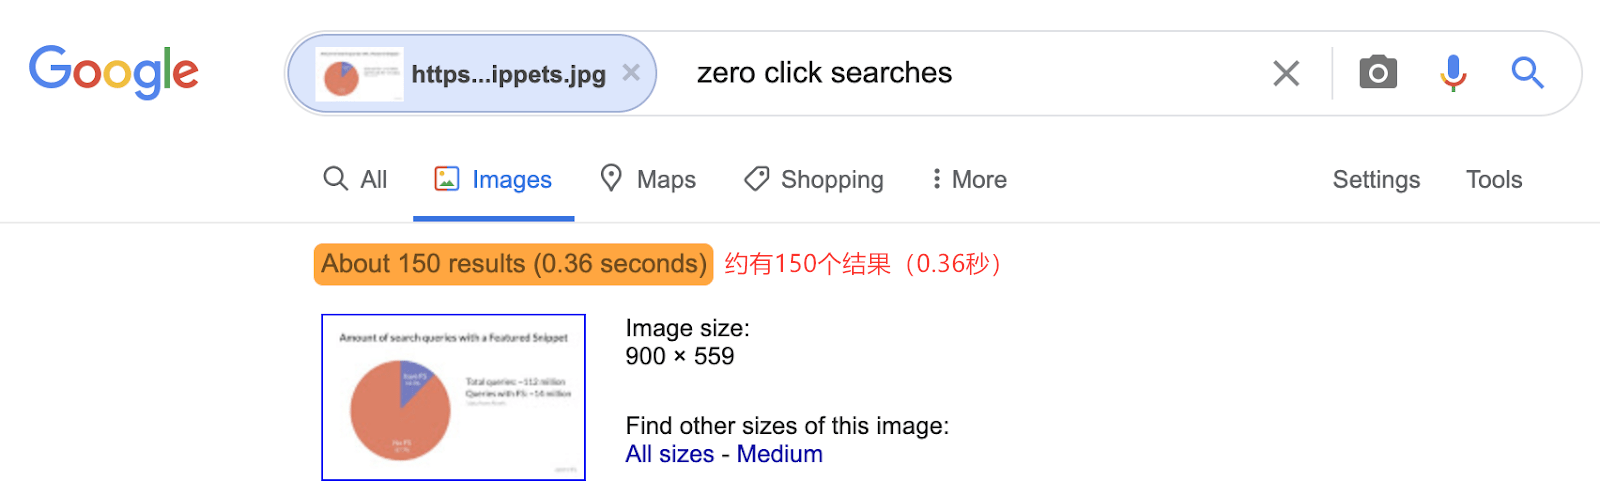 7 image search